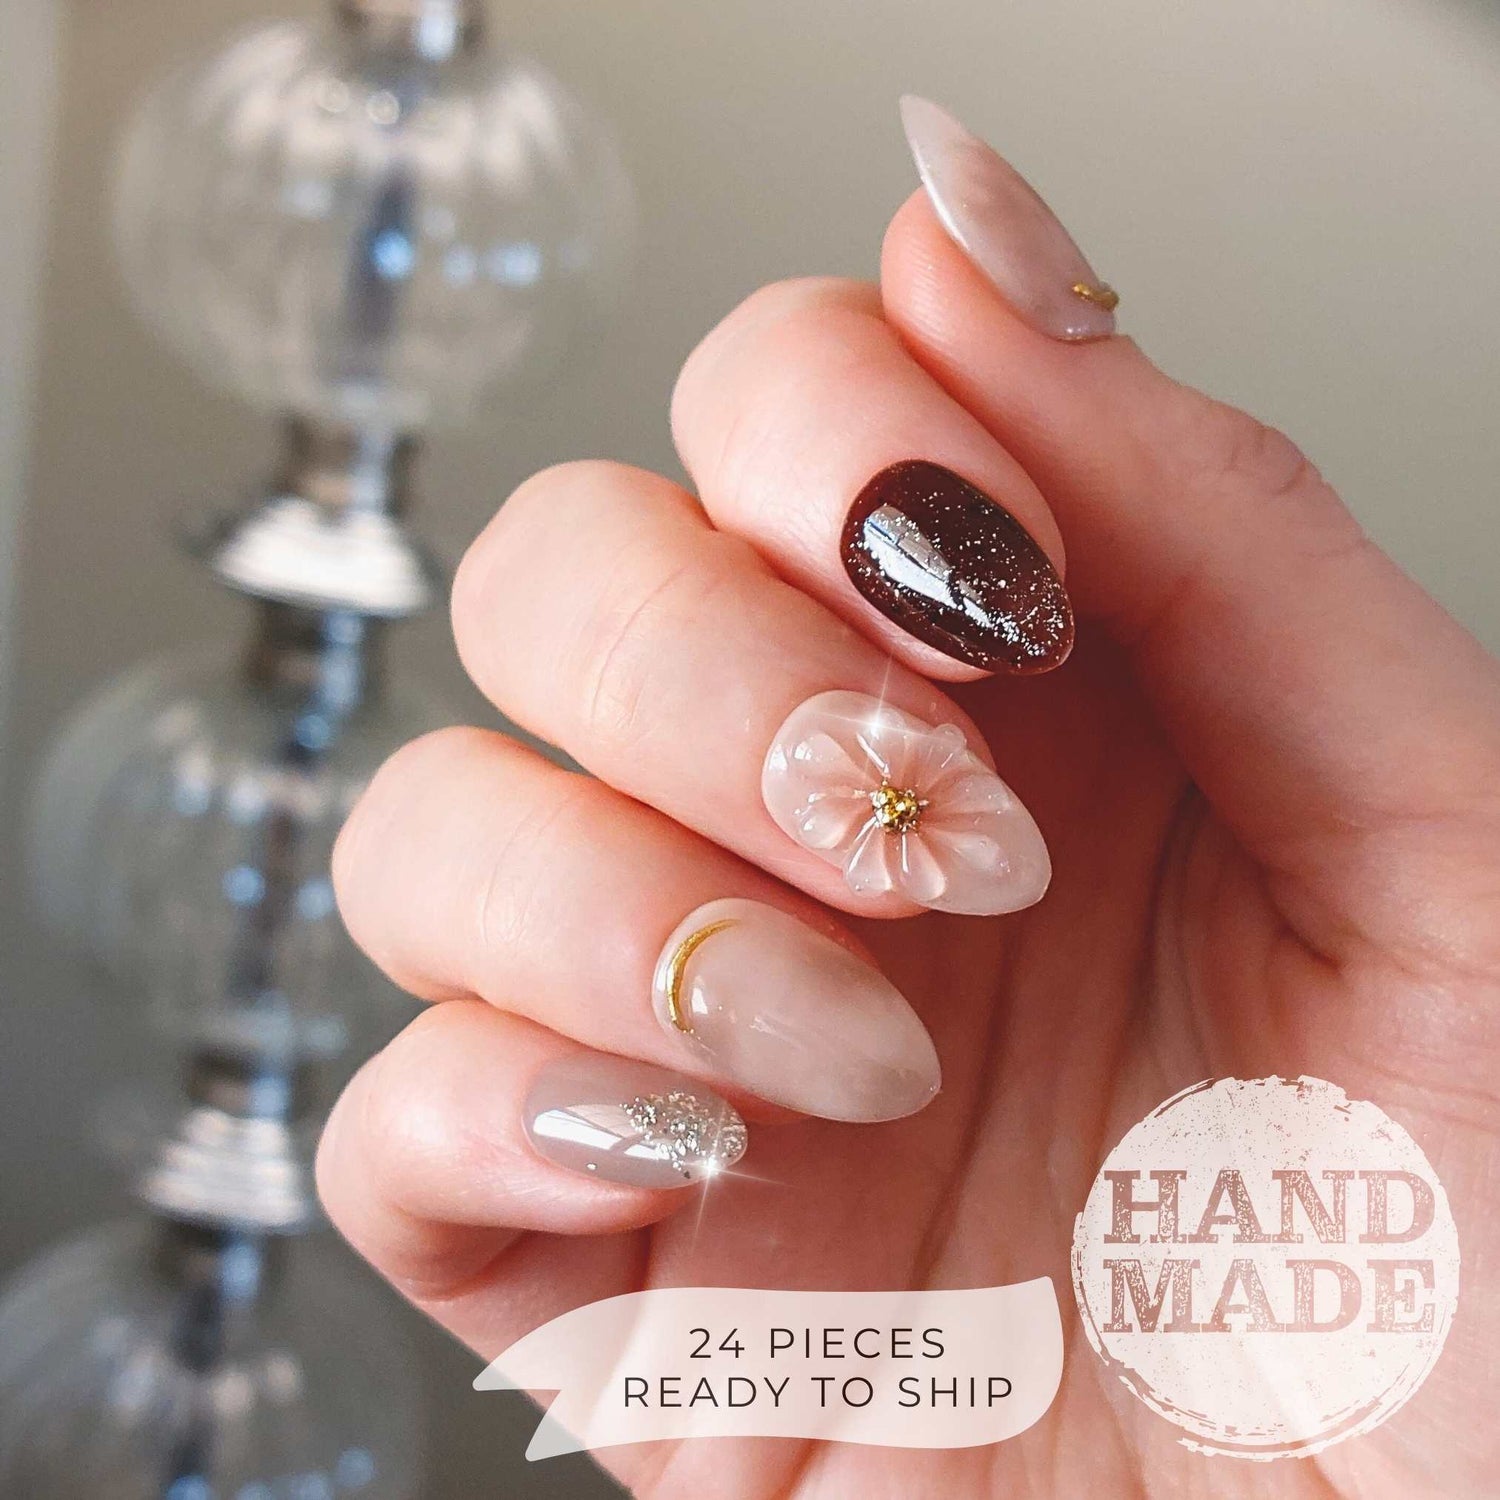 Spring press on nails with light pink flowers and jelly texture, 3d flowers, gold details and silver glitter. Handmade press on nails from FancyB Nails show in short almond.